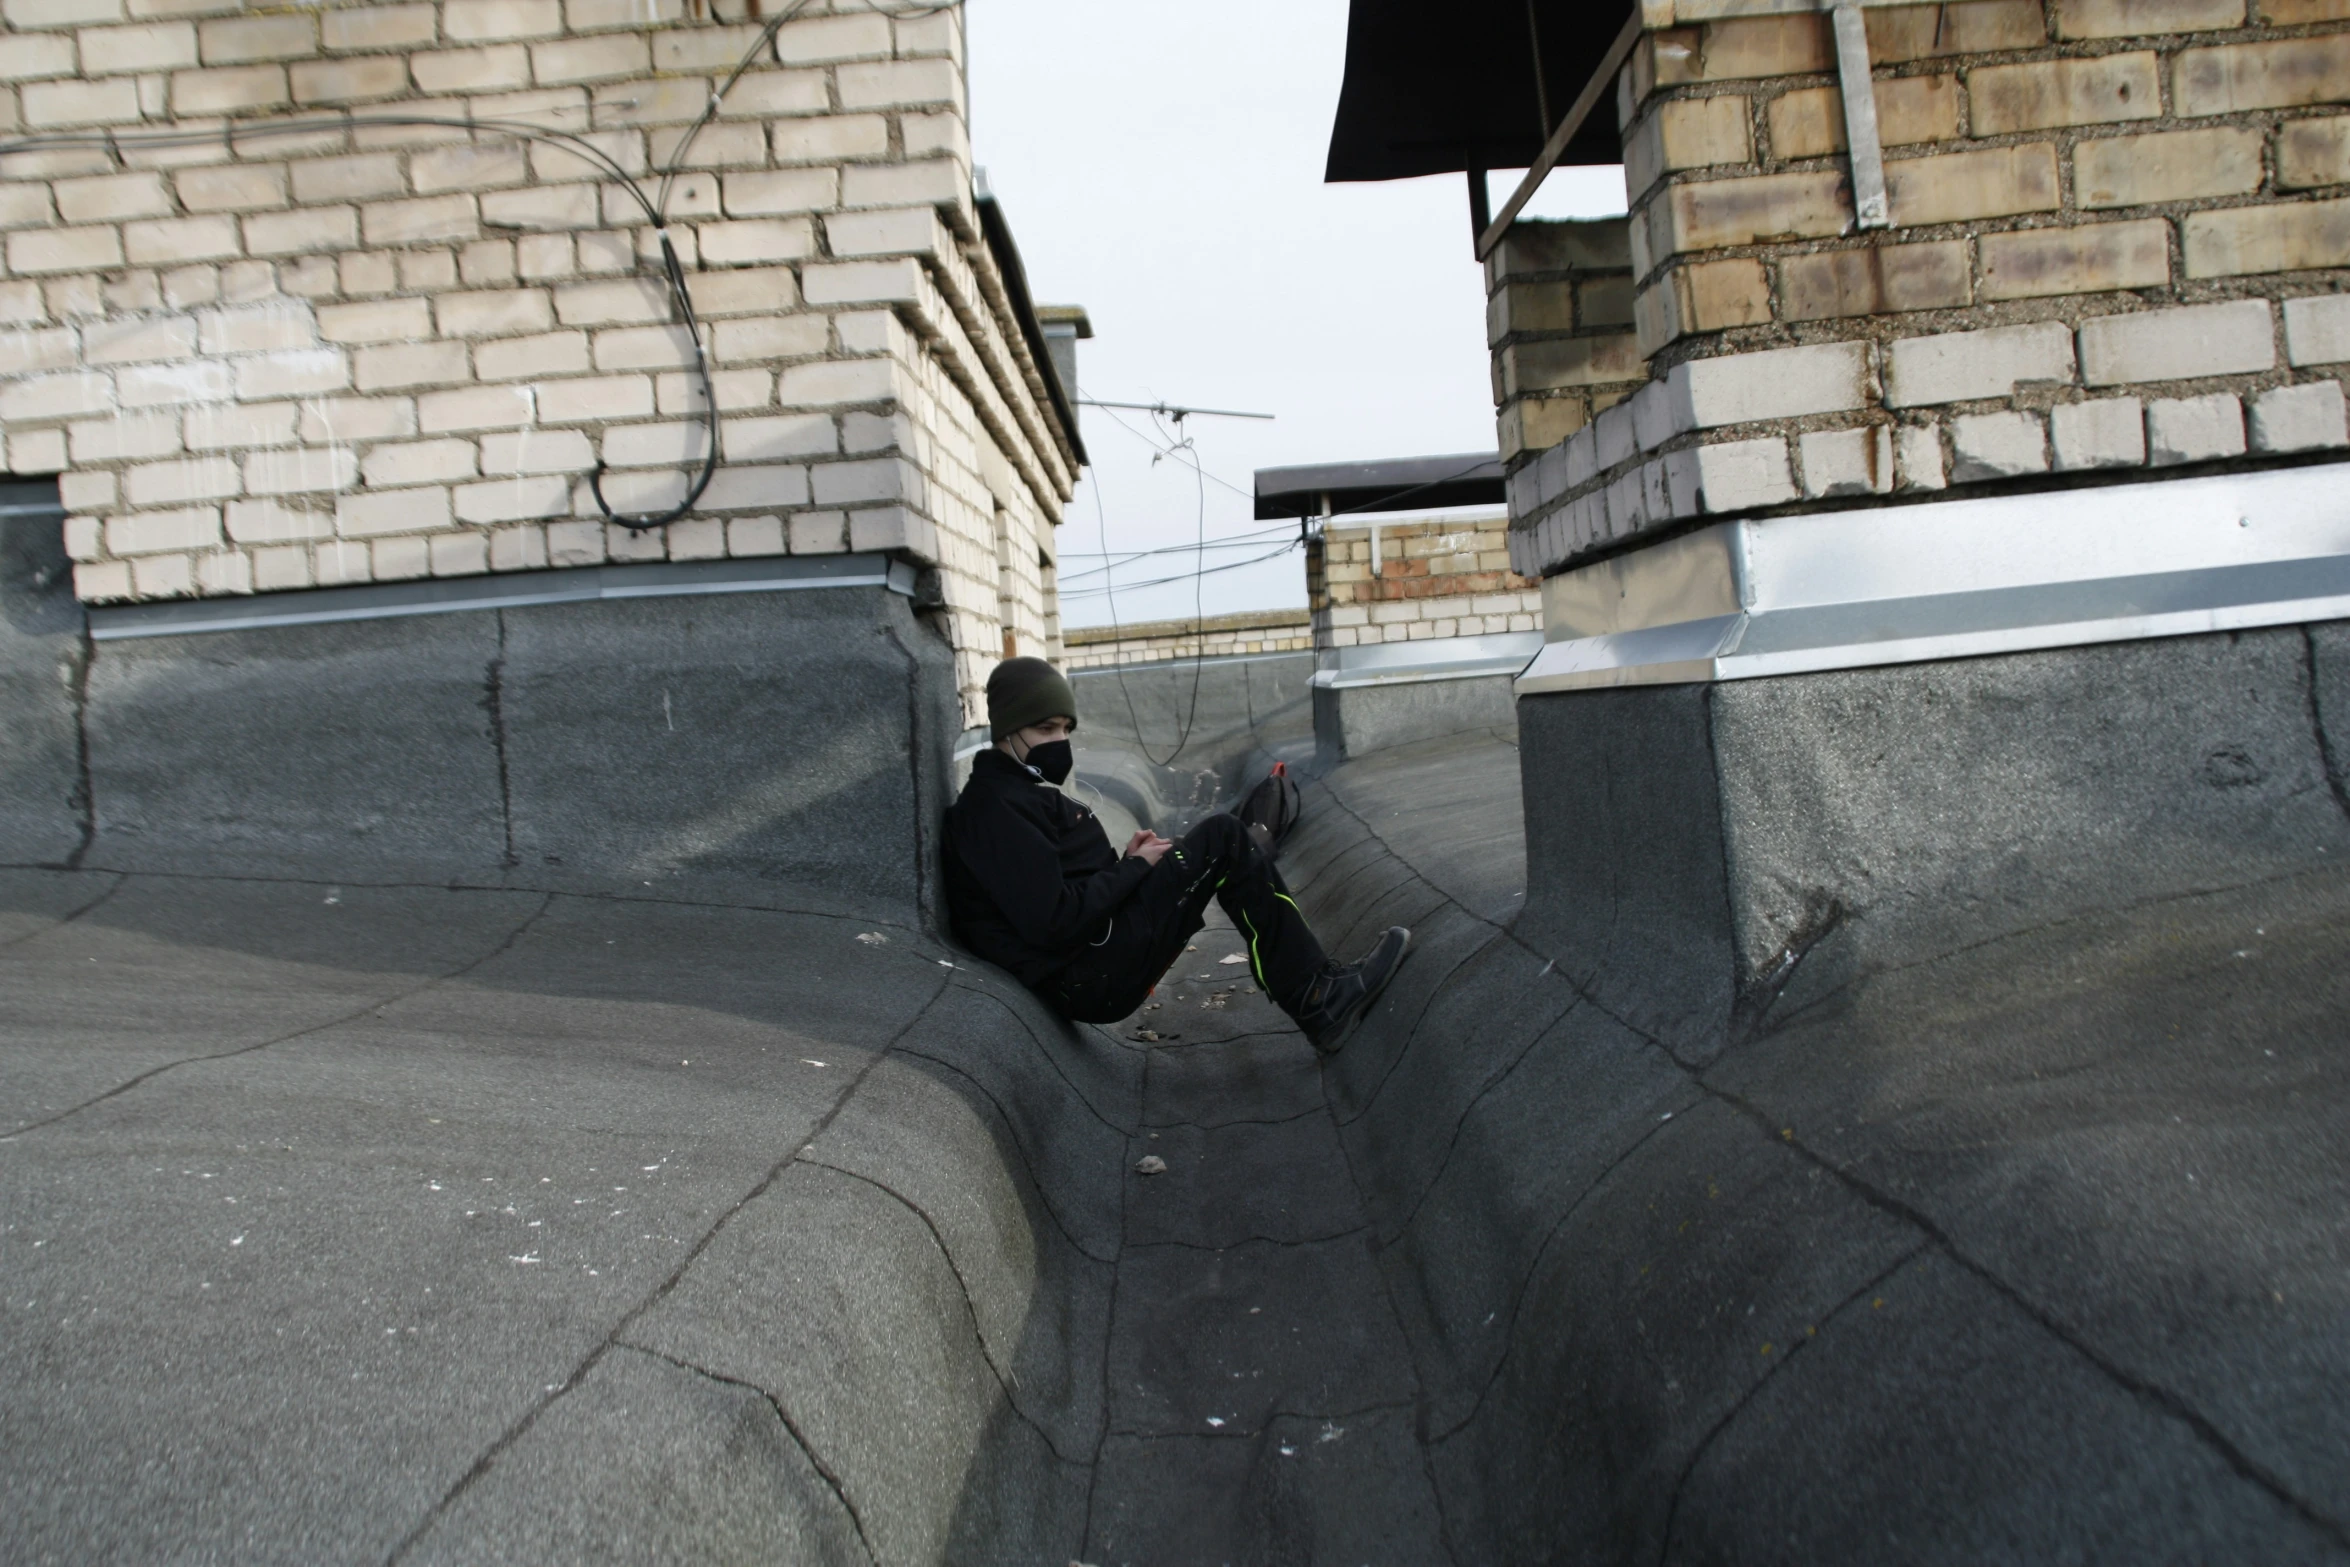 a man sitting on the edge of a skate ramp